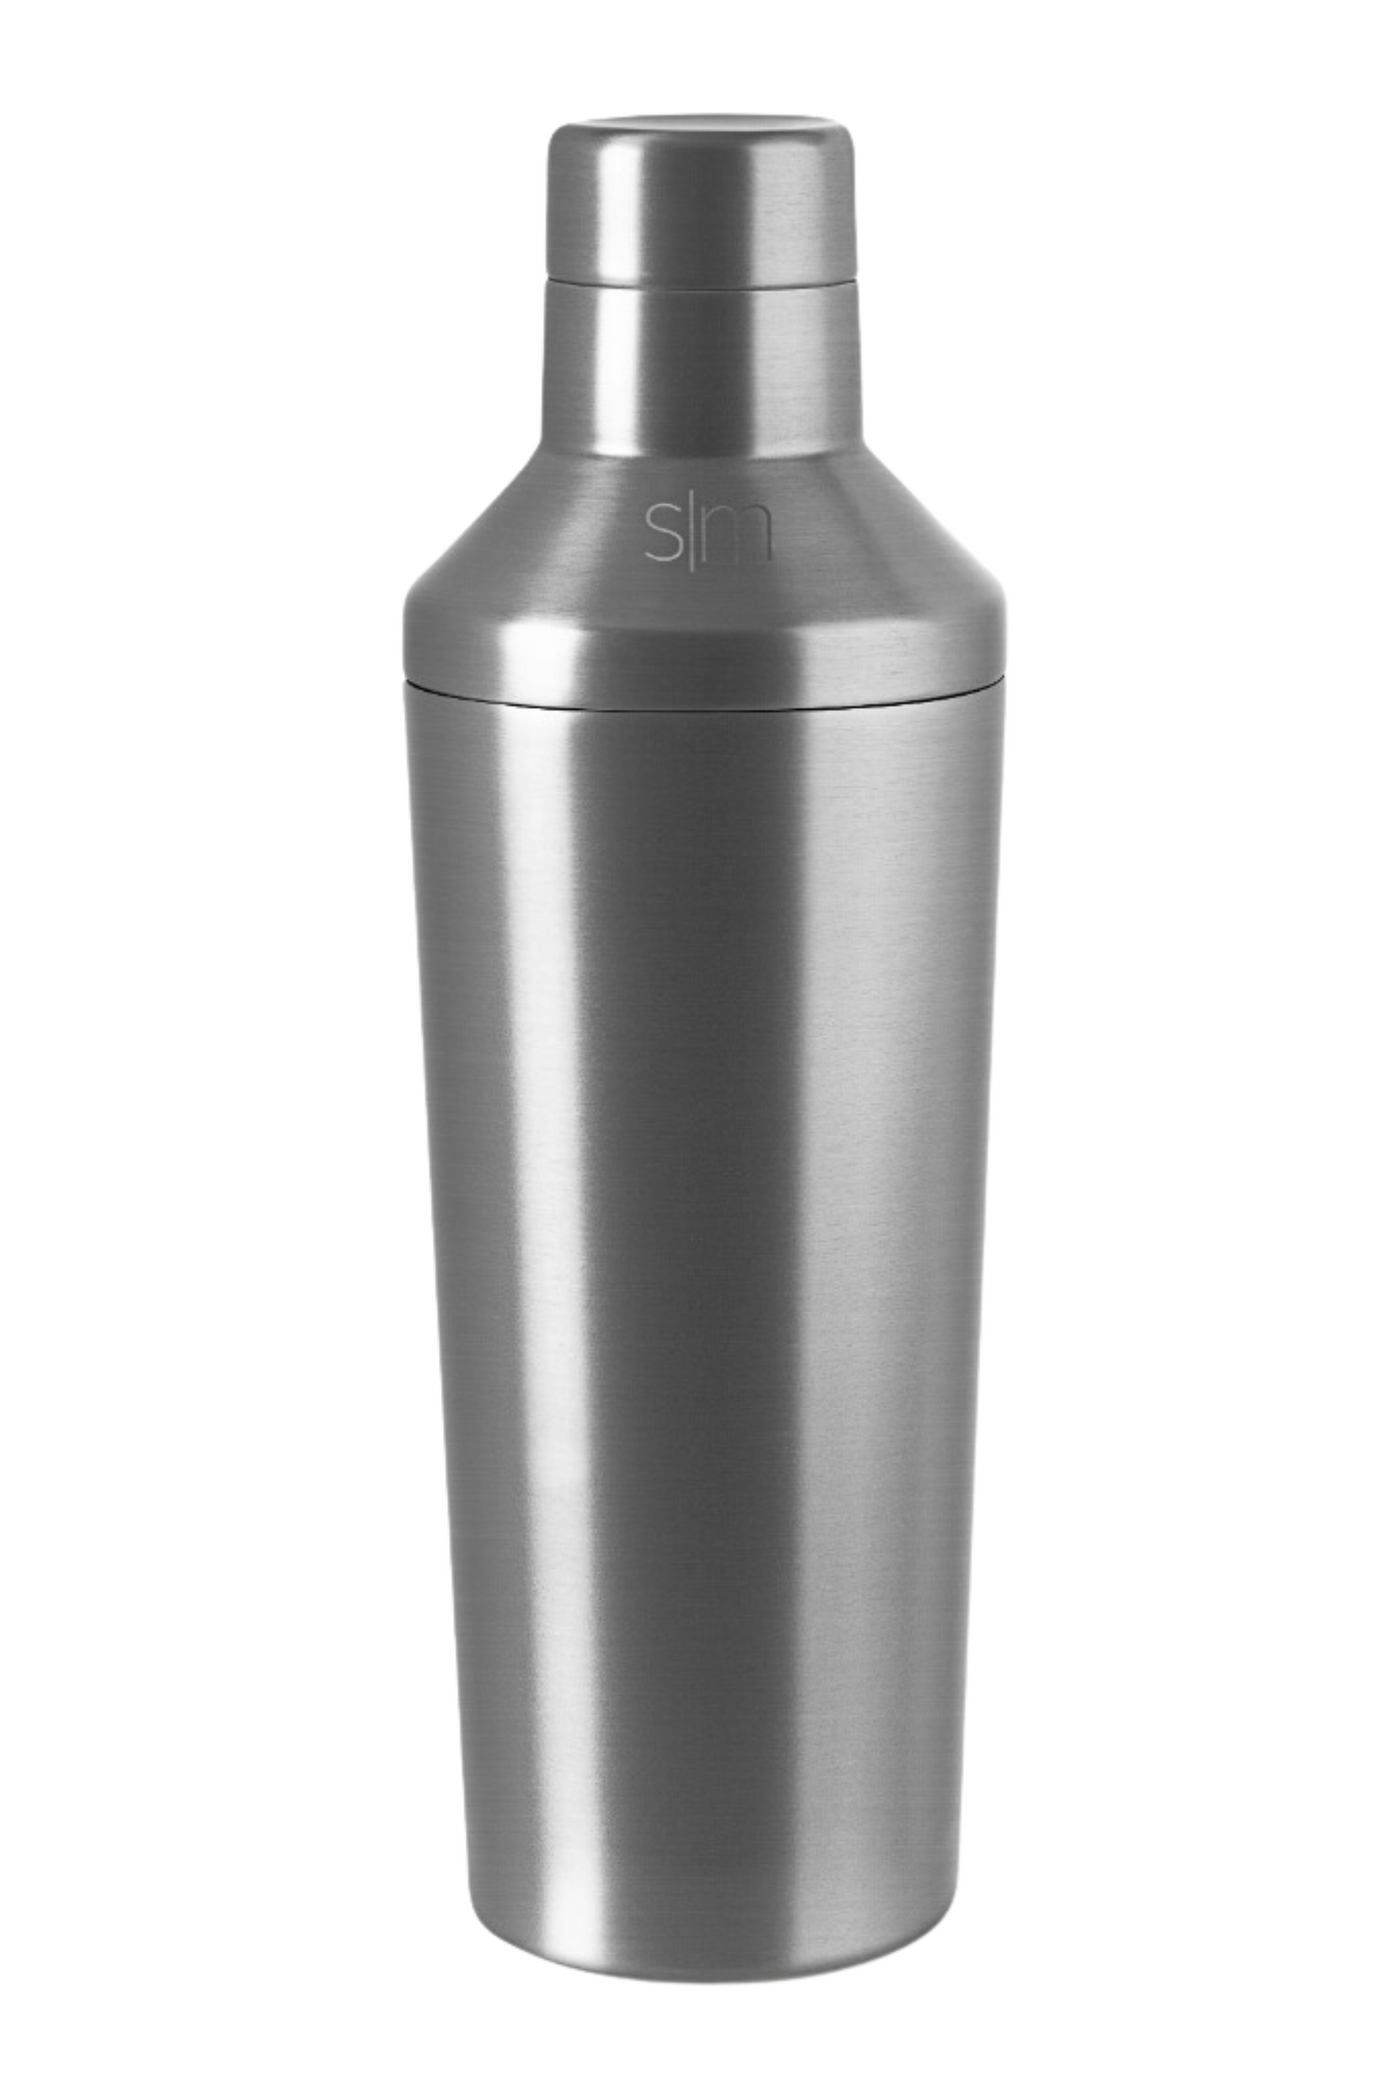 Classic Cocktail Shaker With Jigger Lid - 20oz